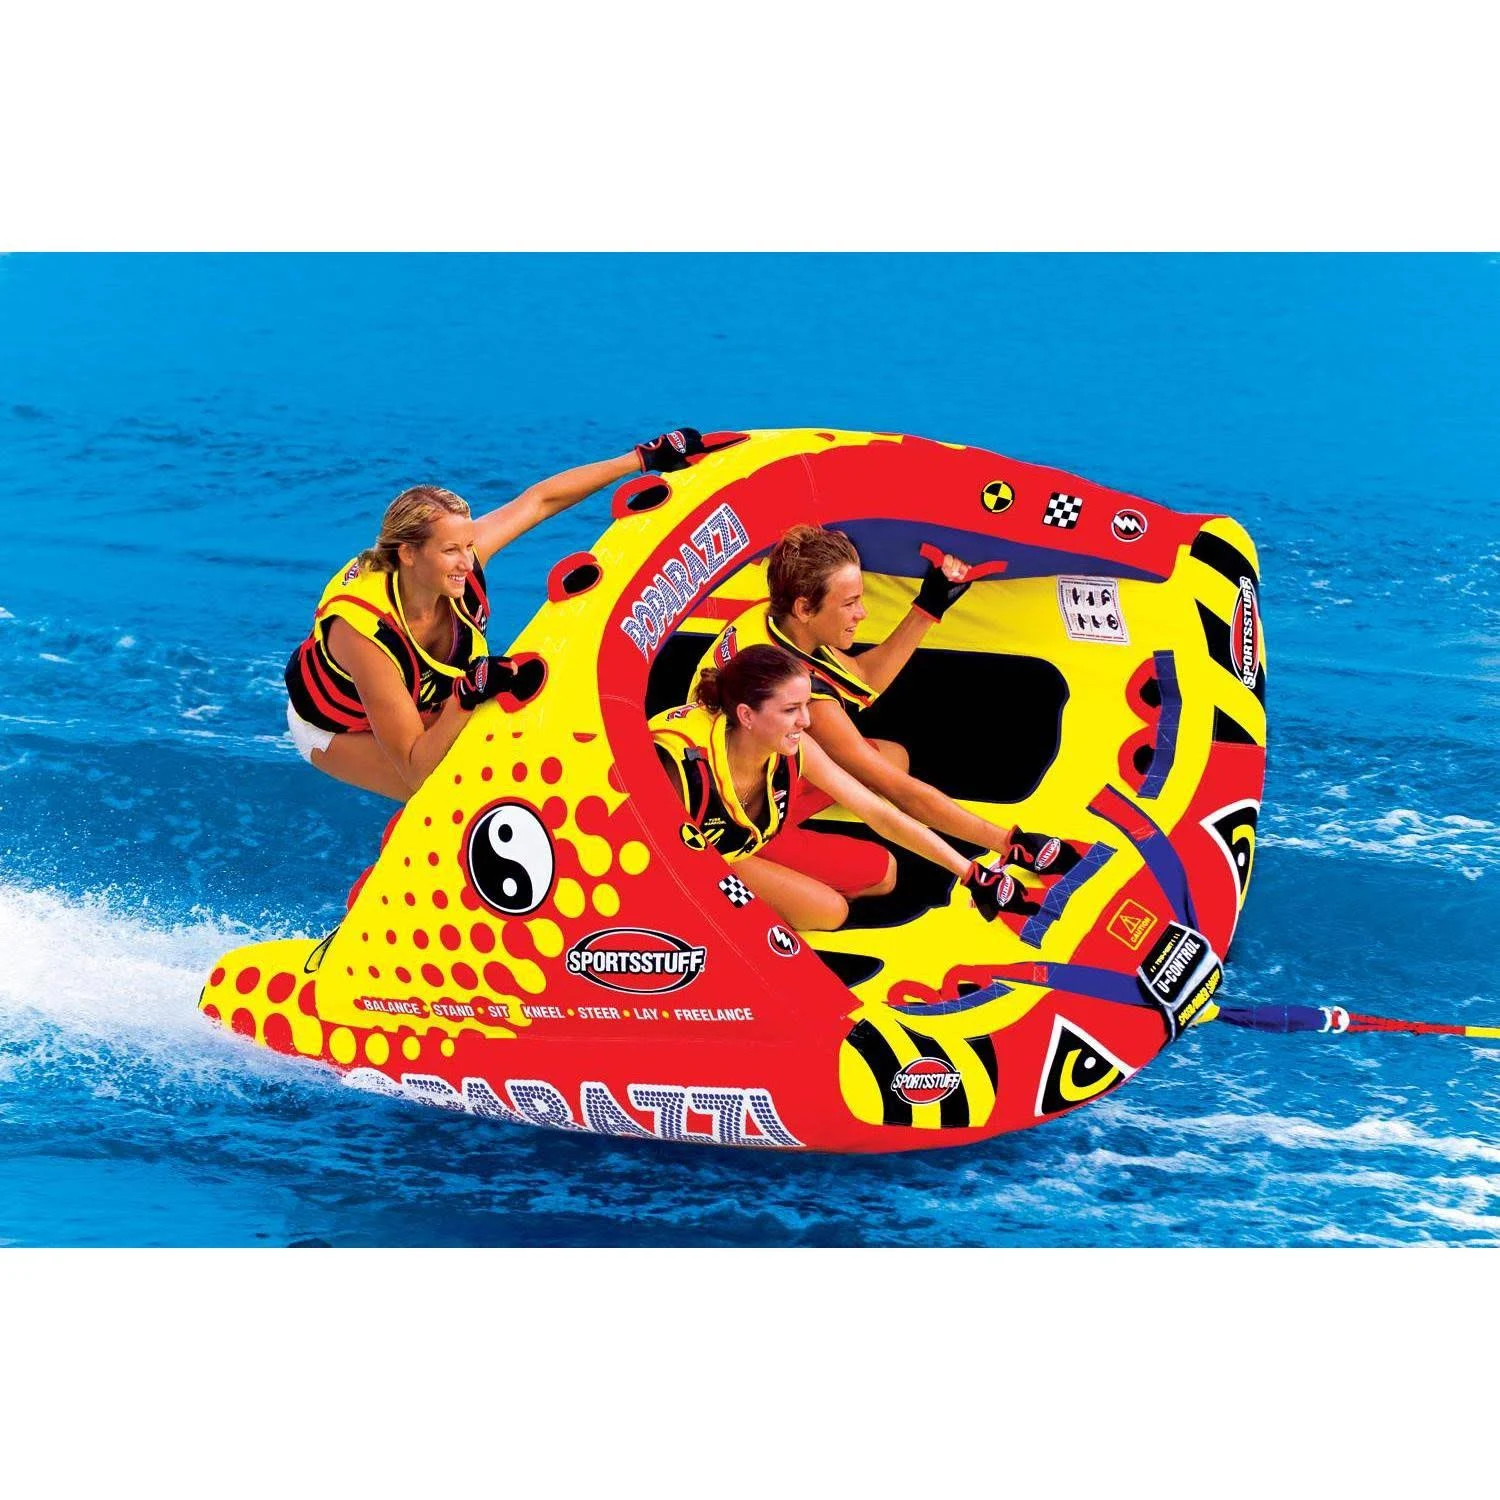 Sportsstuff 53-1750 Poparazzi Triple Rider Inflatable Towable Tube w/ Tow Rope